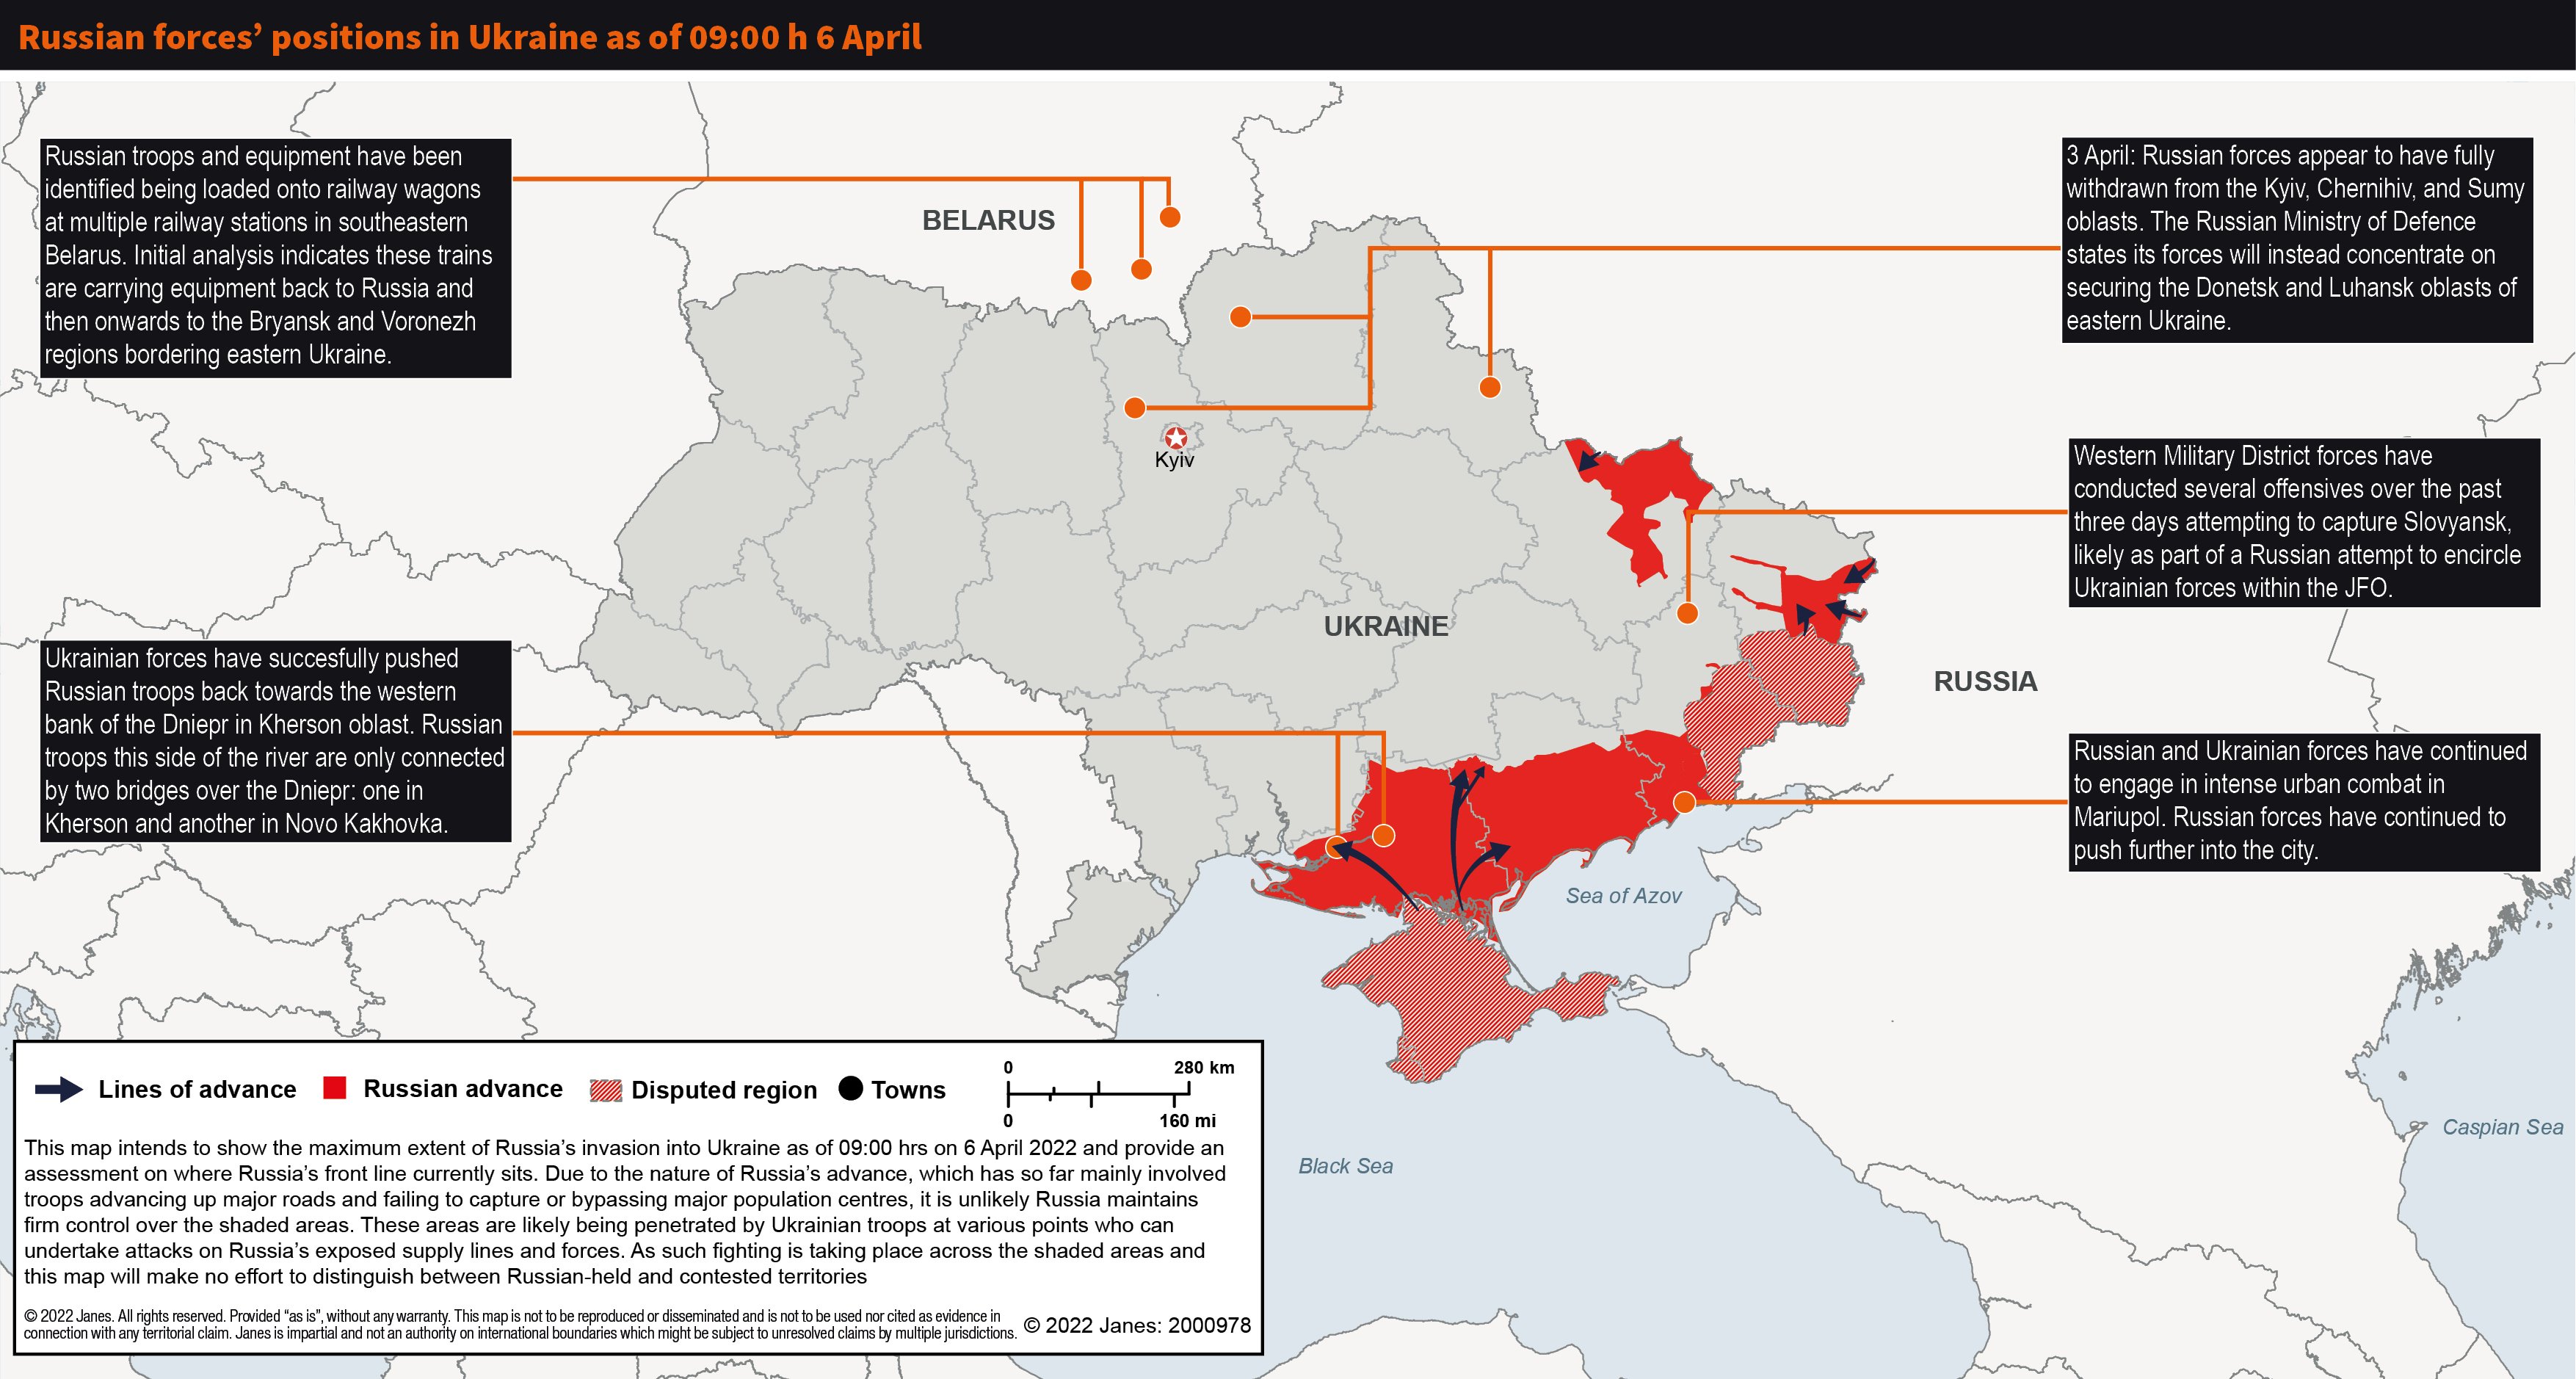 Russian forces positions in Ukraine